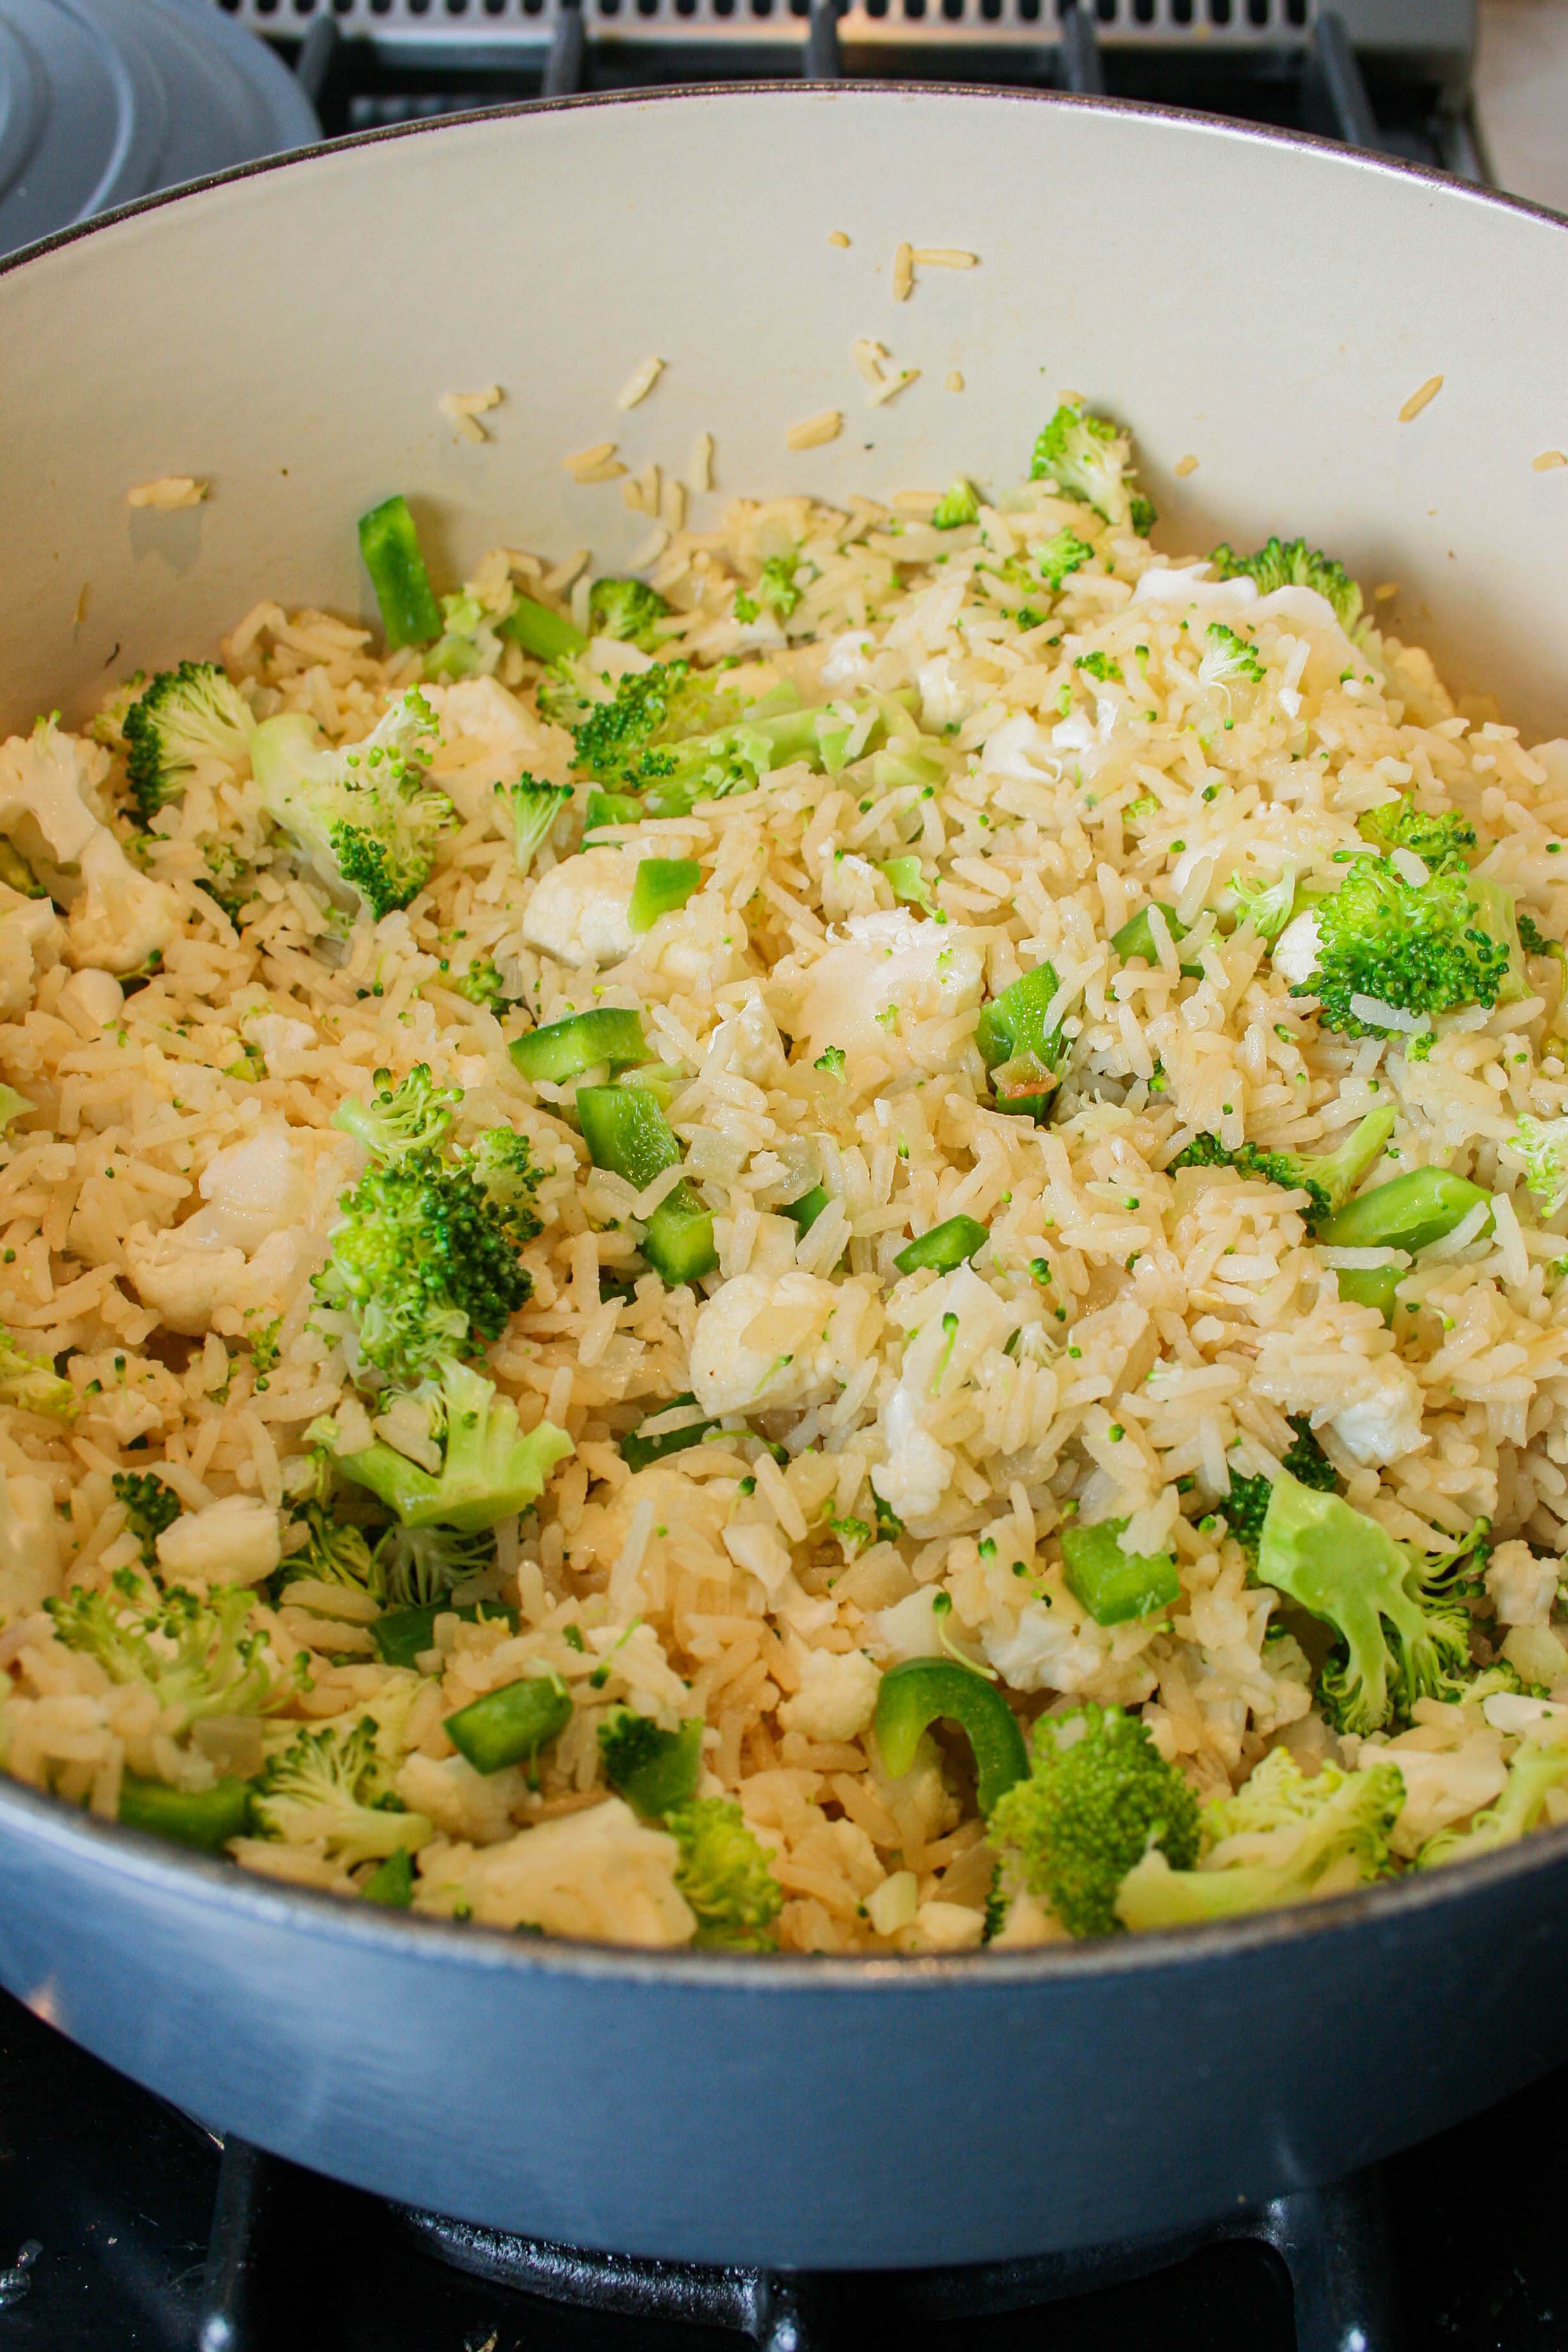 Vegetables added to cooked rice pilaf